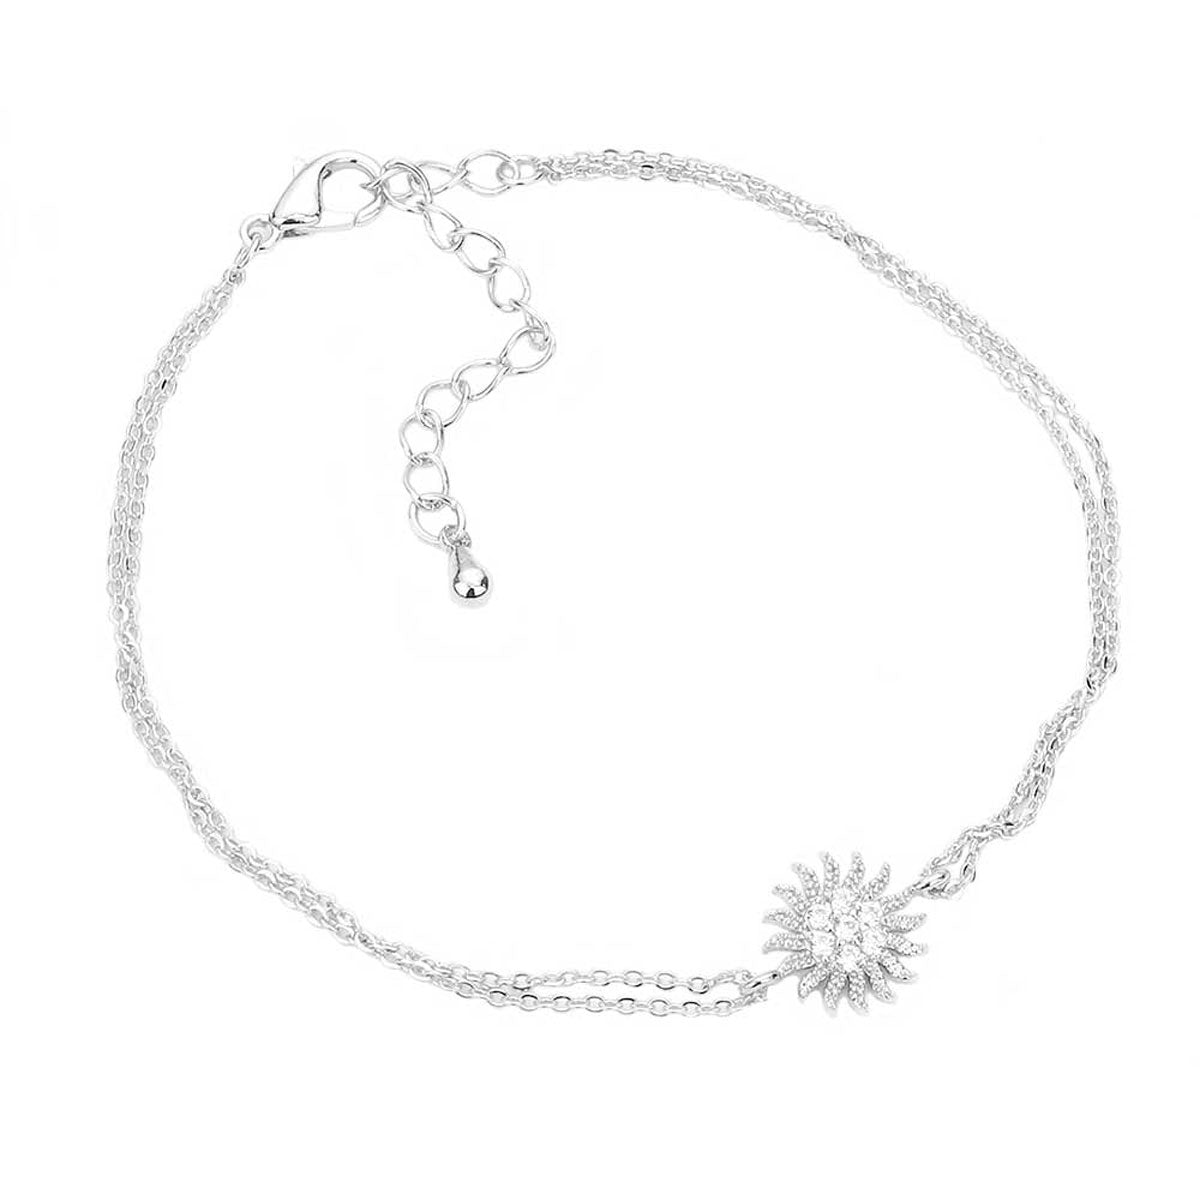 Rhodium CZ Brass Metal Sun Charm Accented Double Layered Bracelet. Get ready with these double layered Bracelet, put on a pop of color to complete your ensemble. Perfect for adding just the right amount of shimmer & shine and a touch of class to special events. Perfect Birthday Gift, Anniversary Gift, Mother's Day Gift, Graduation Gift, Prom Jewelry, Just Because Gift, Thank you Gift.